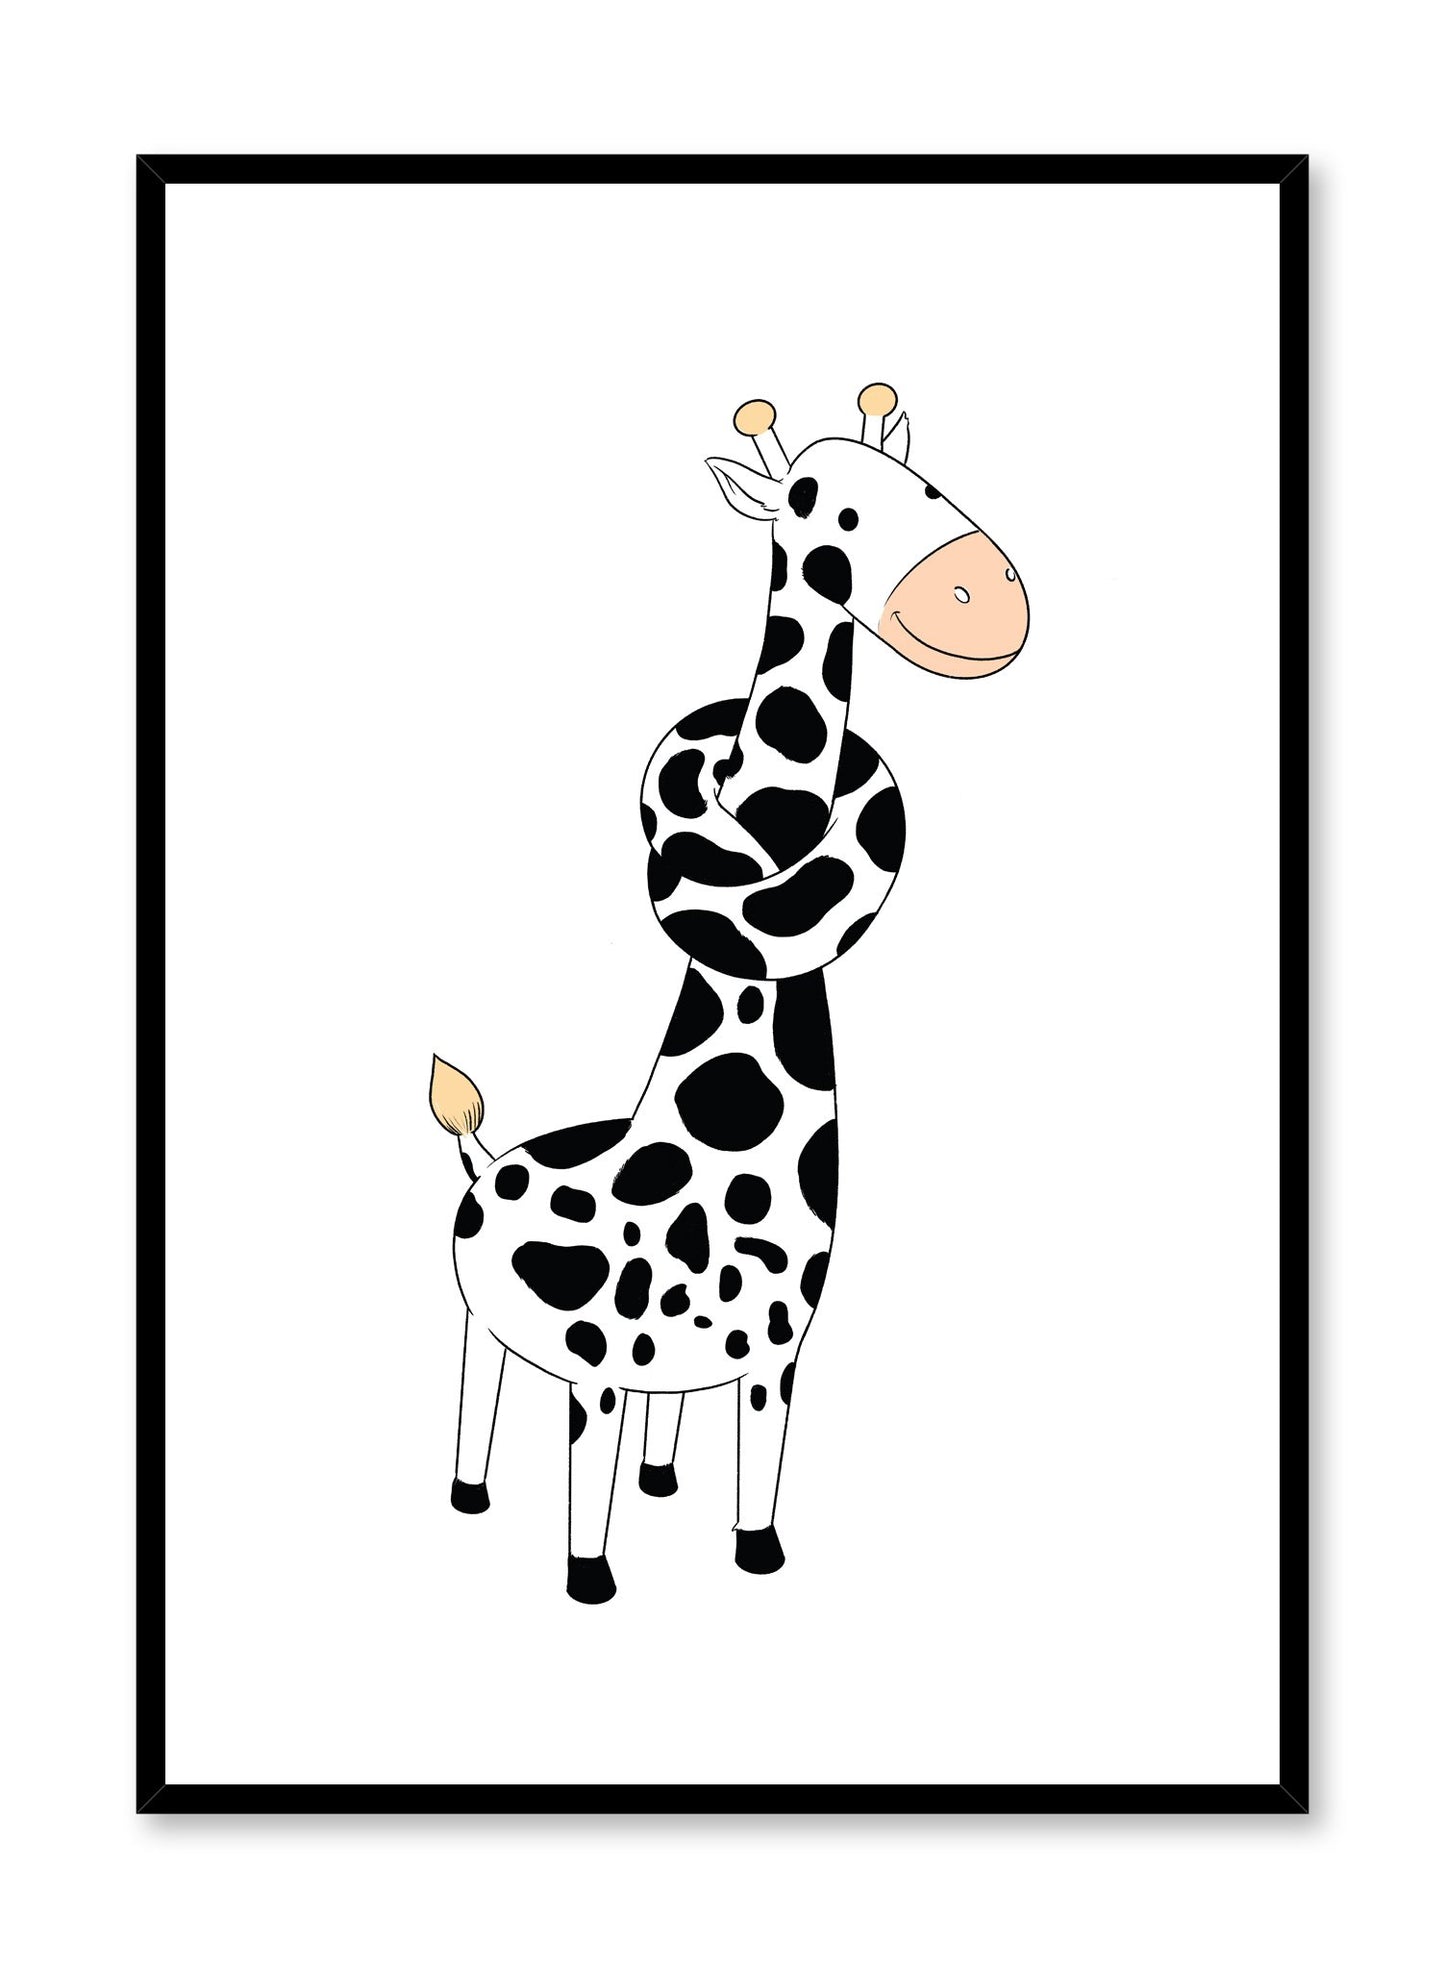 Modern minimalist poster by Opposite Wall with kids illustration of a giraffe